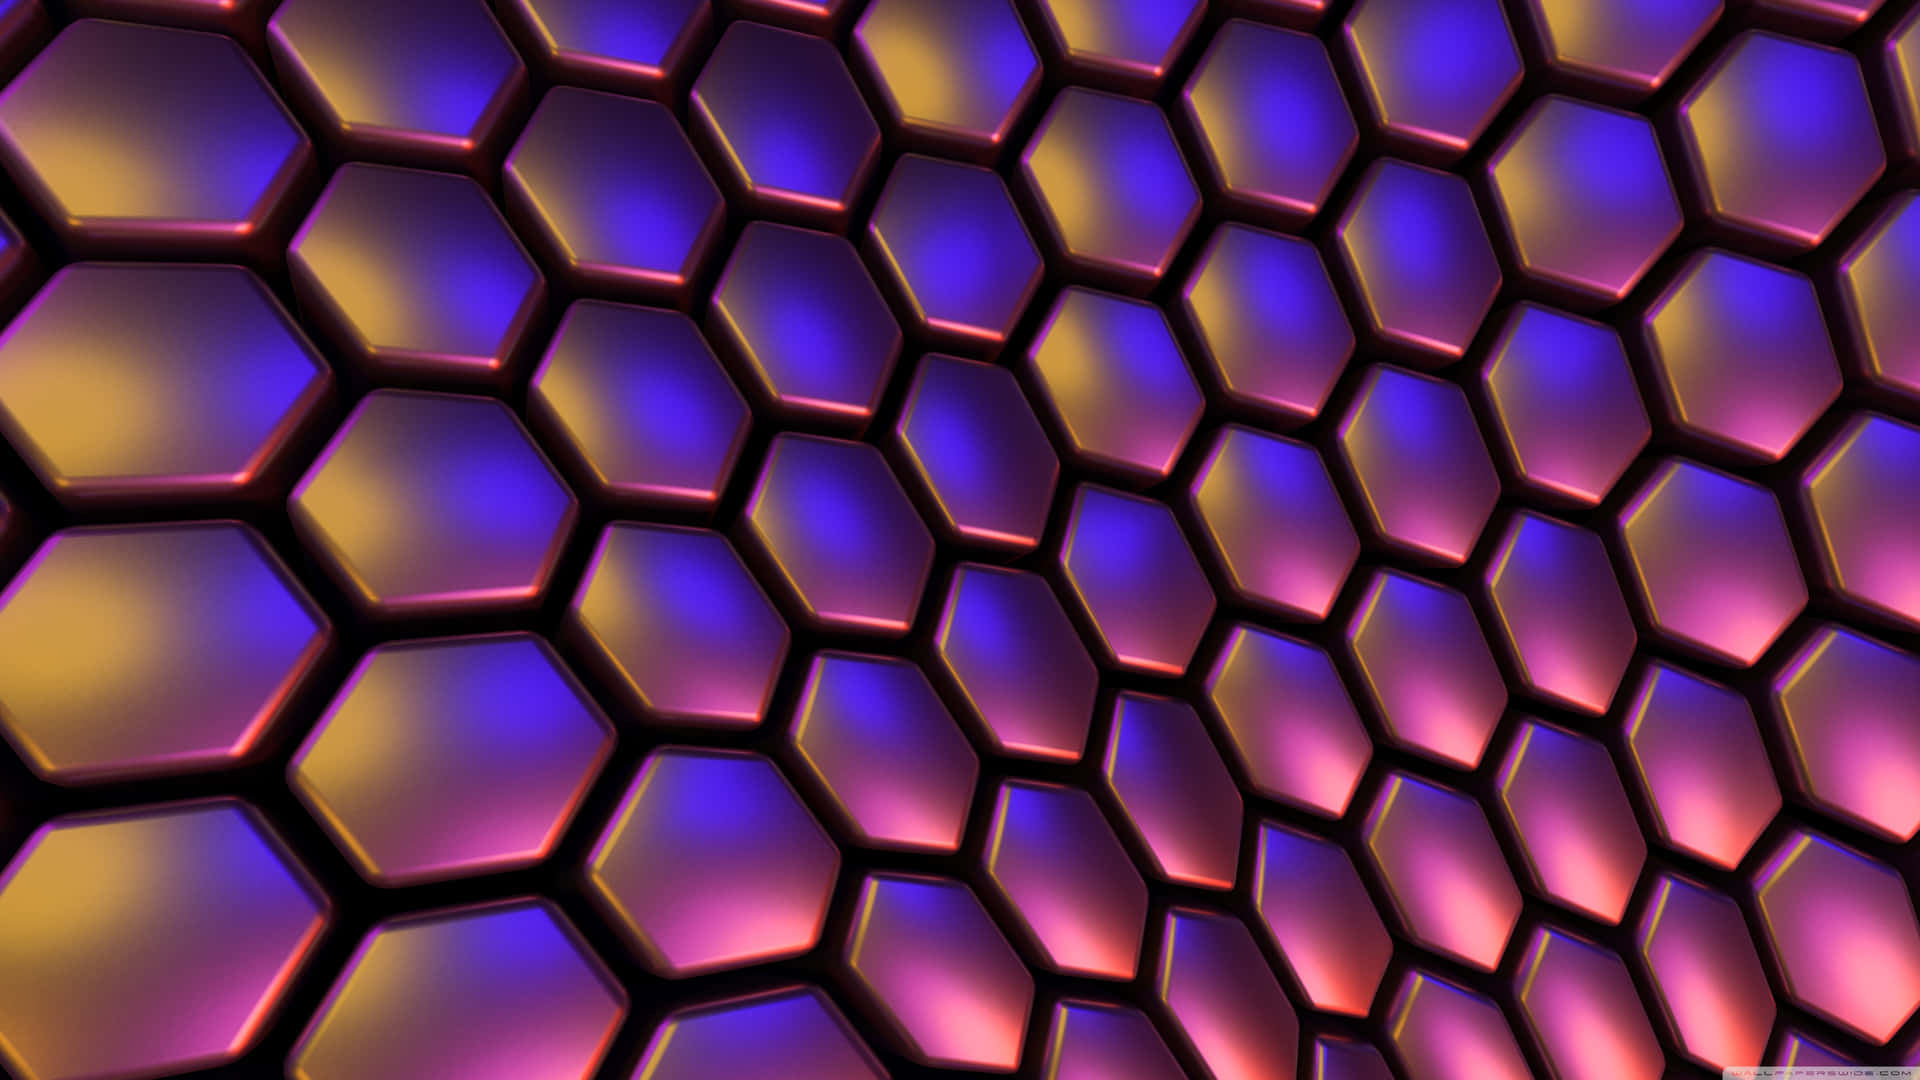 Explore the endless shapes and vibrant colors of this stunning Hexagon 4K wallpaper. Wallpaper